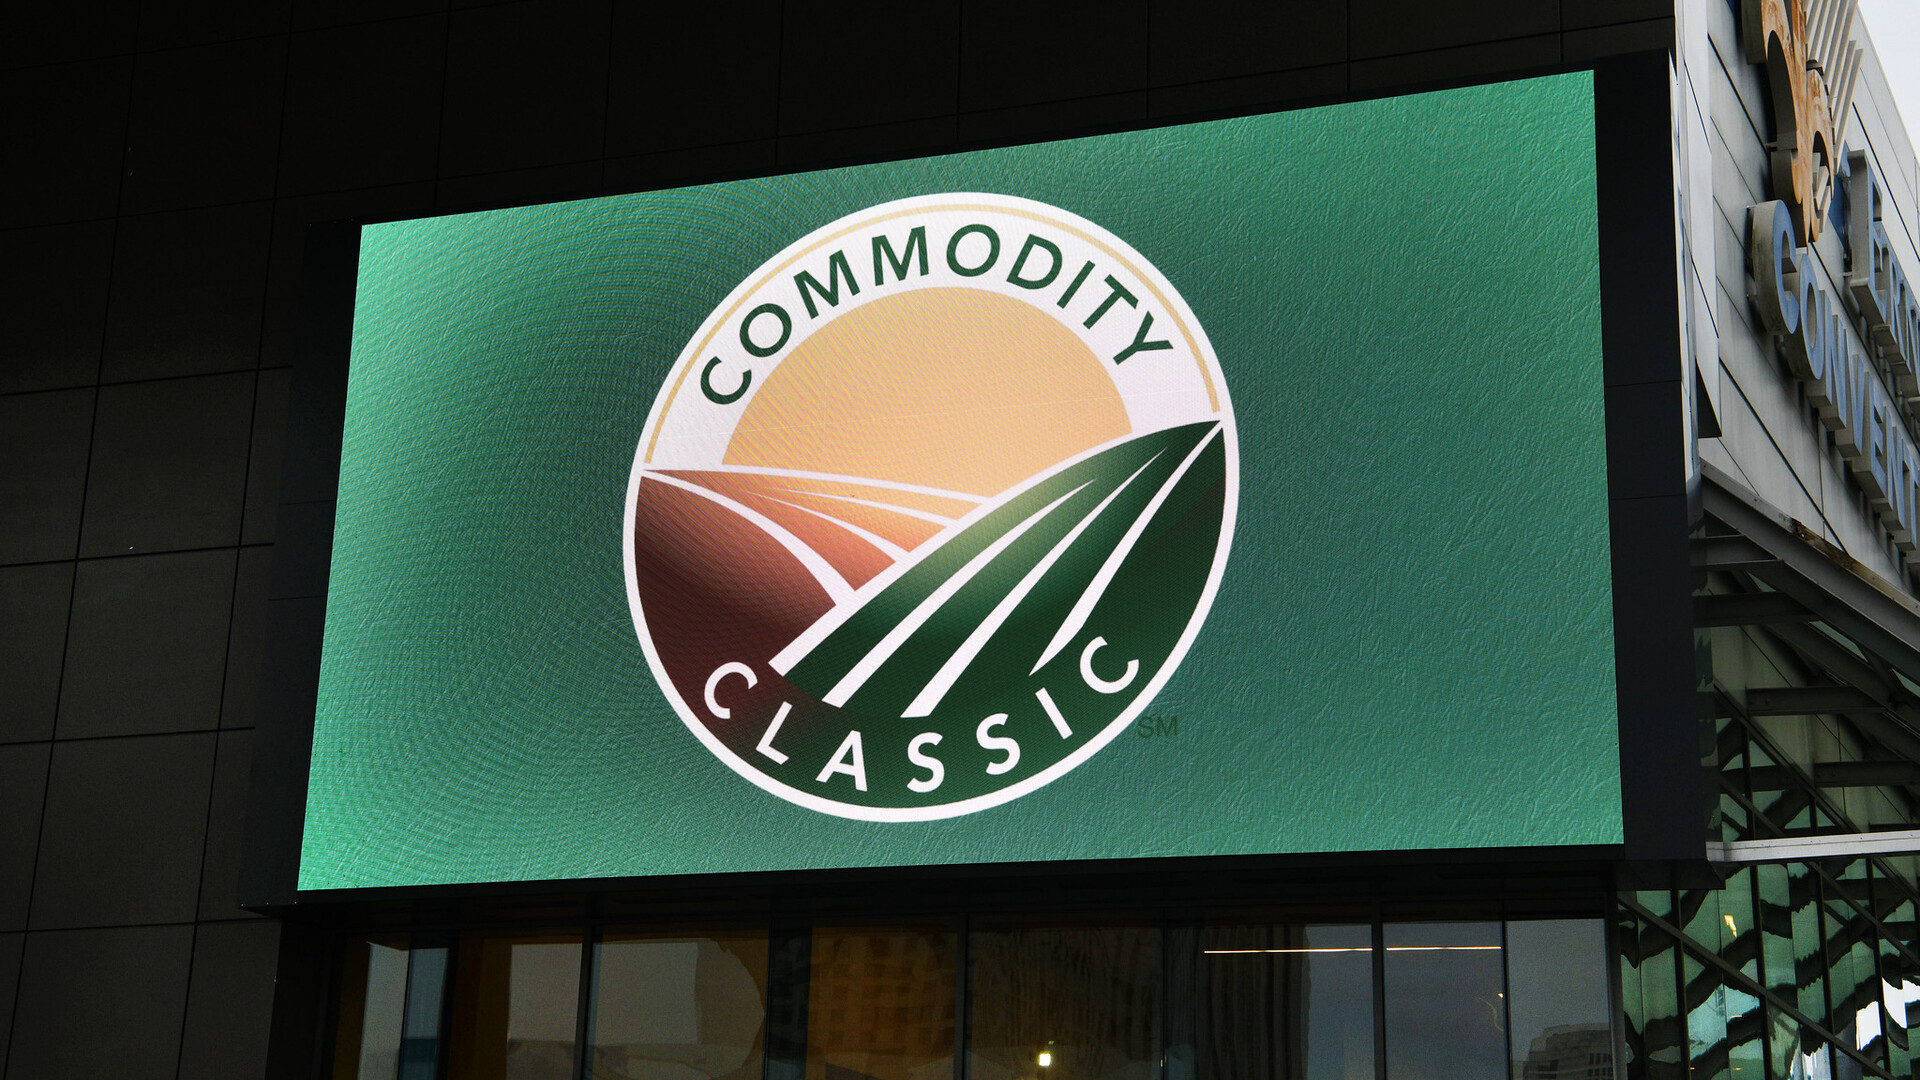 Commodity Classic Headed for Orlando in March